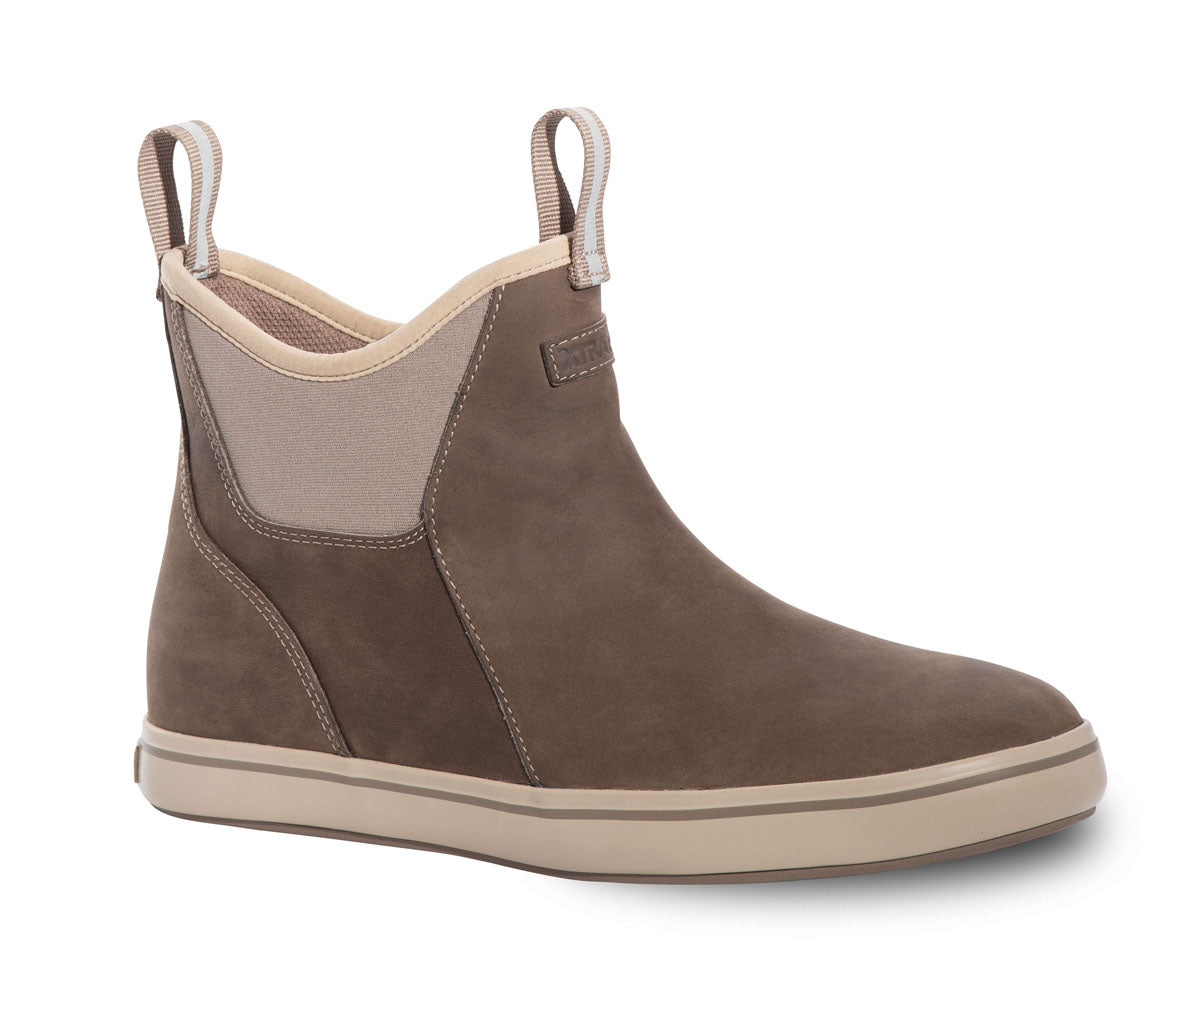 Men's Xtratuf 6 in Leather Ankle Deck Boot in Taupe from the front